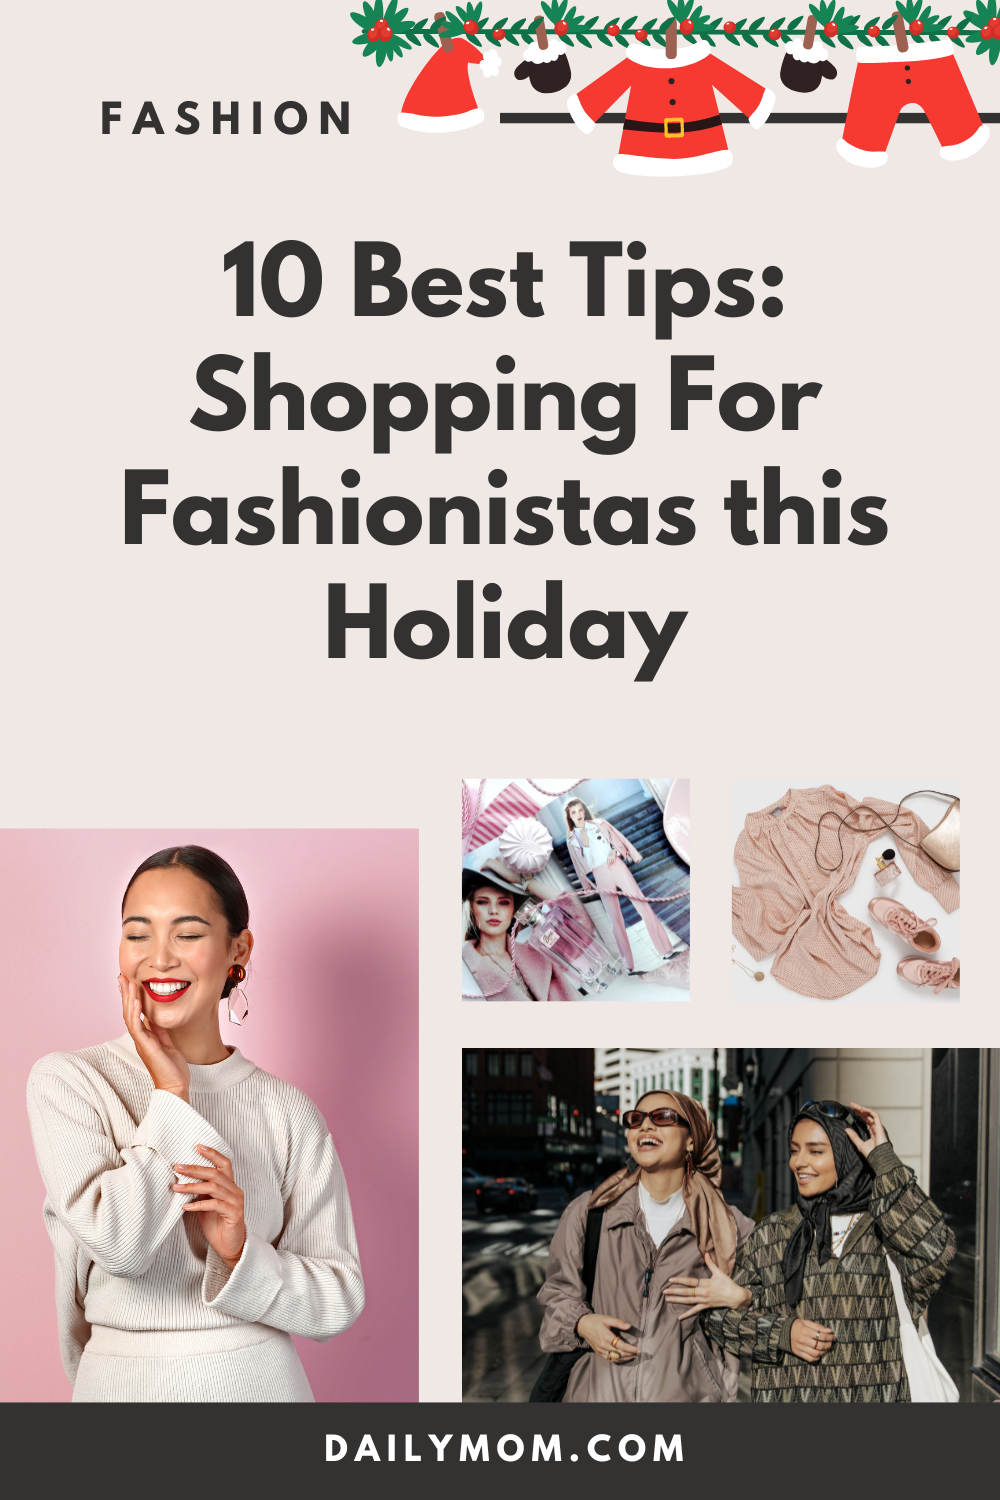 10 Easy Fashion-Forward Finds: Christmas Gifts & Tips For The Fashionista